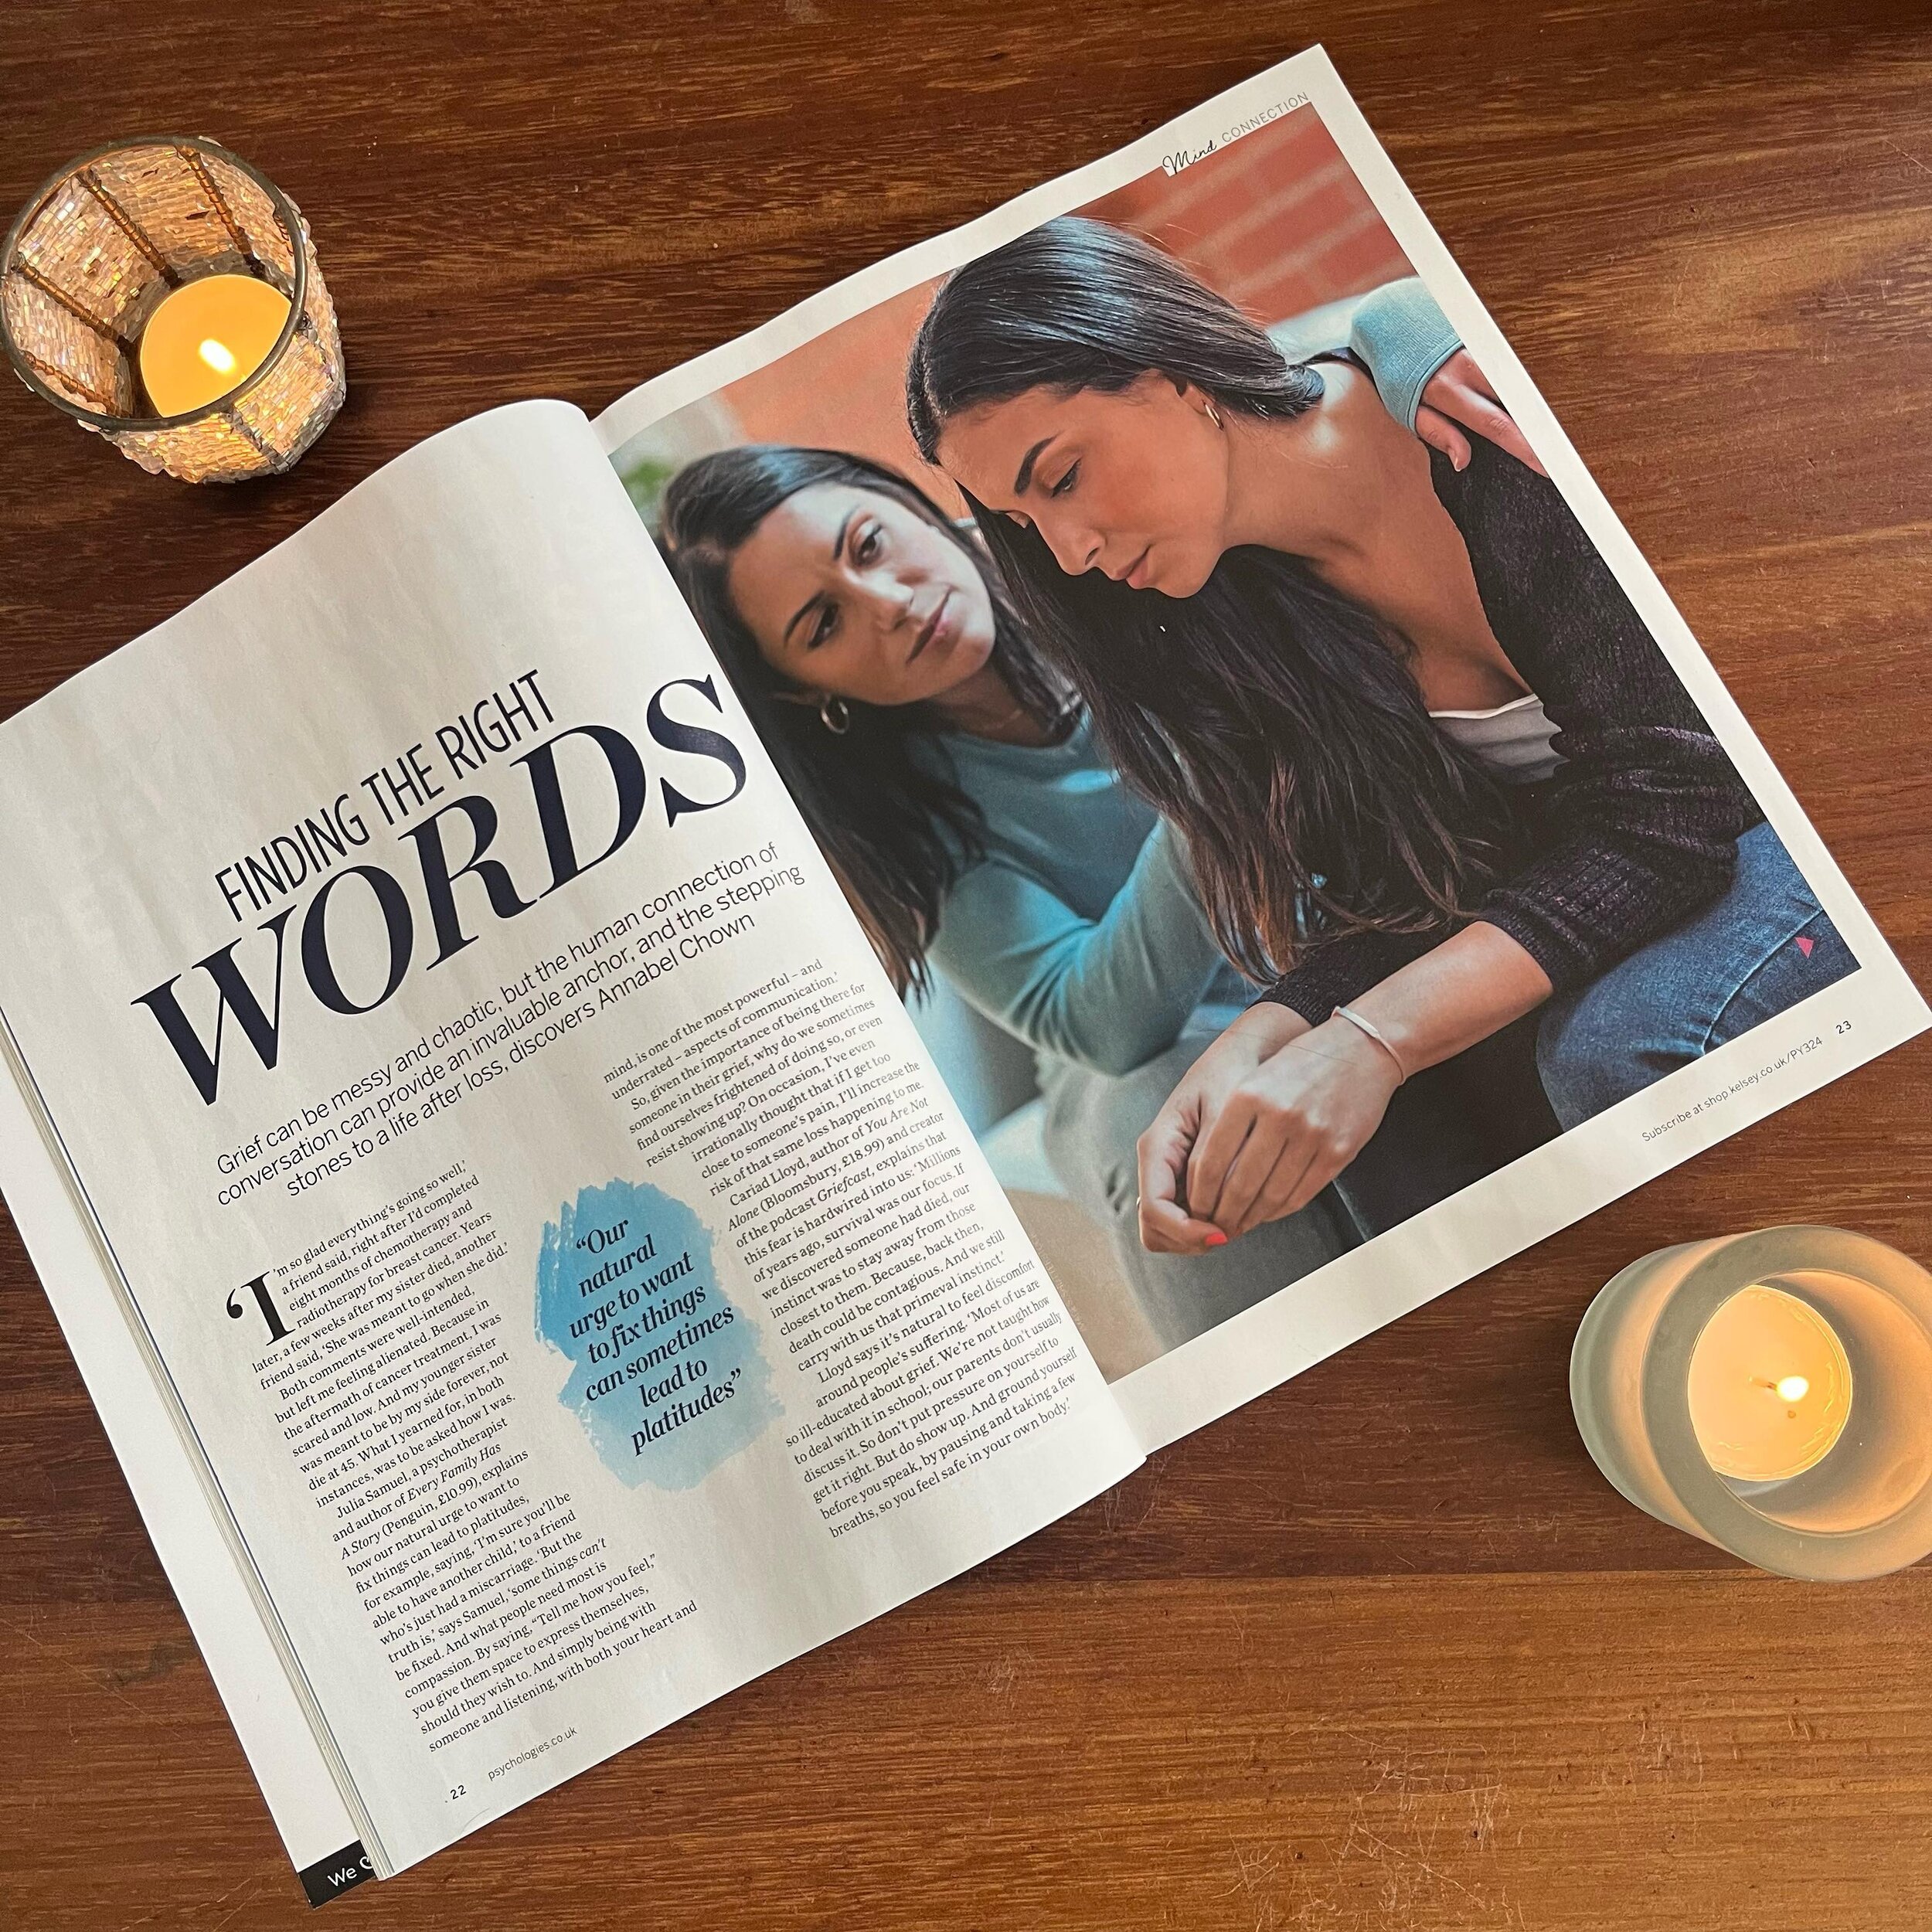 It was both a huge honour and a healing experience to speak to @juliasamuelmbe and @cariadlloyd for my latest @psychologiesmagazine article, Finding The Right Words, which is about the power of human connection in the wake of loss.

I wrote this piec